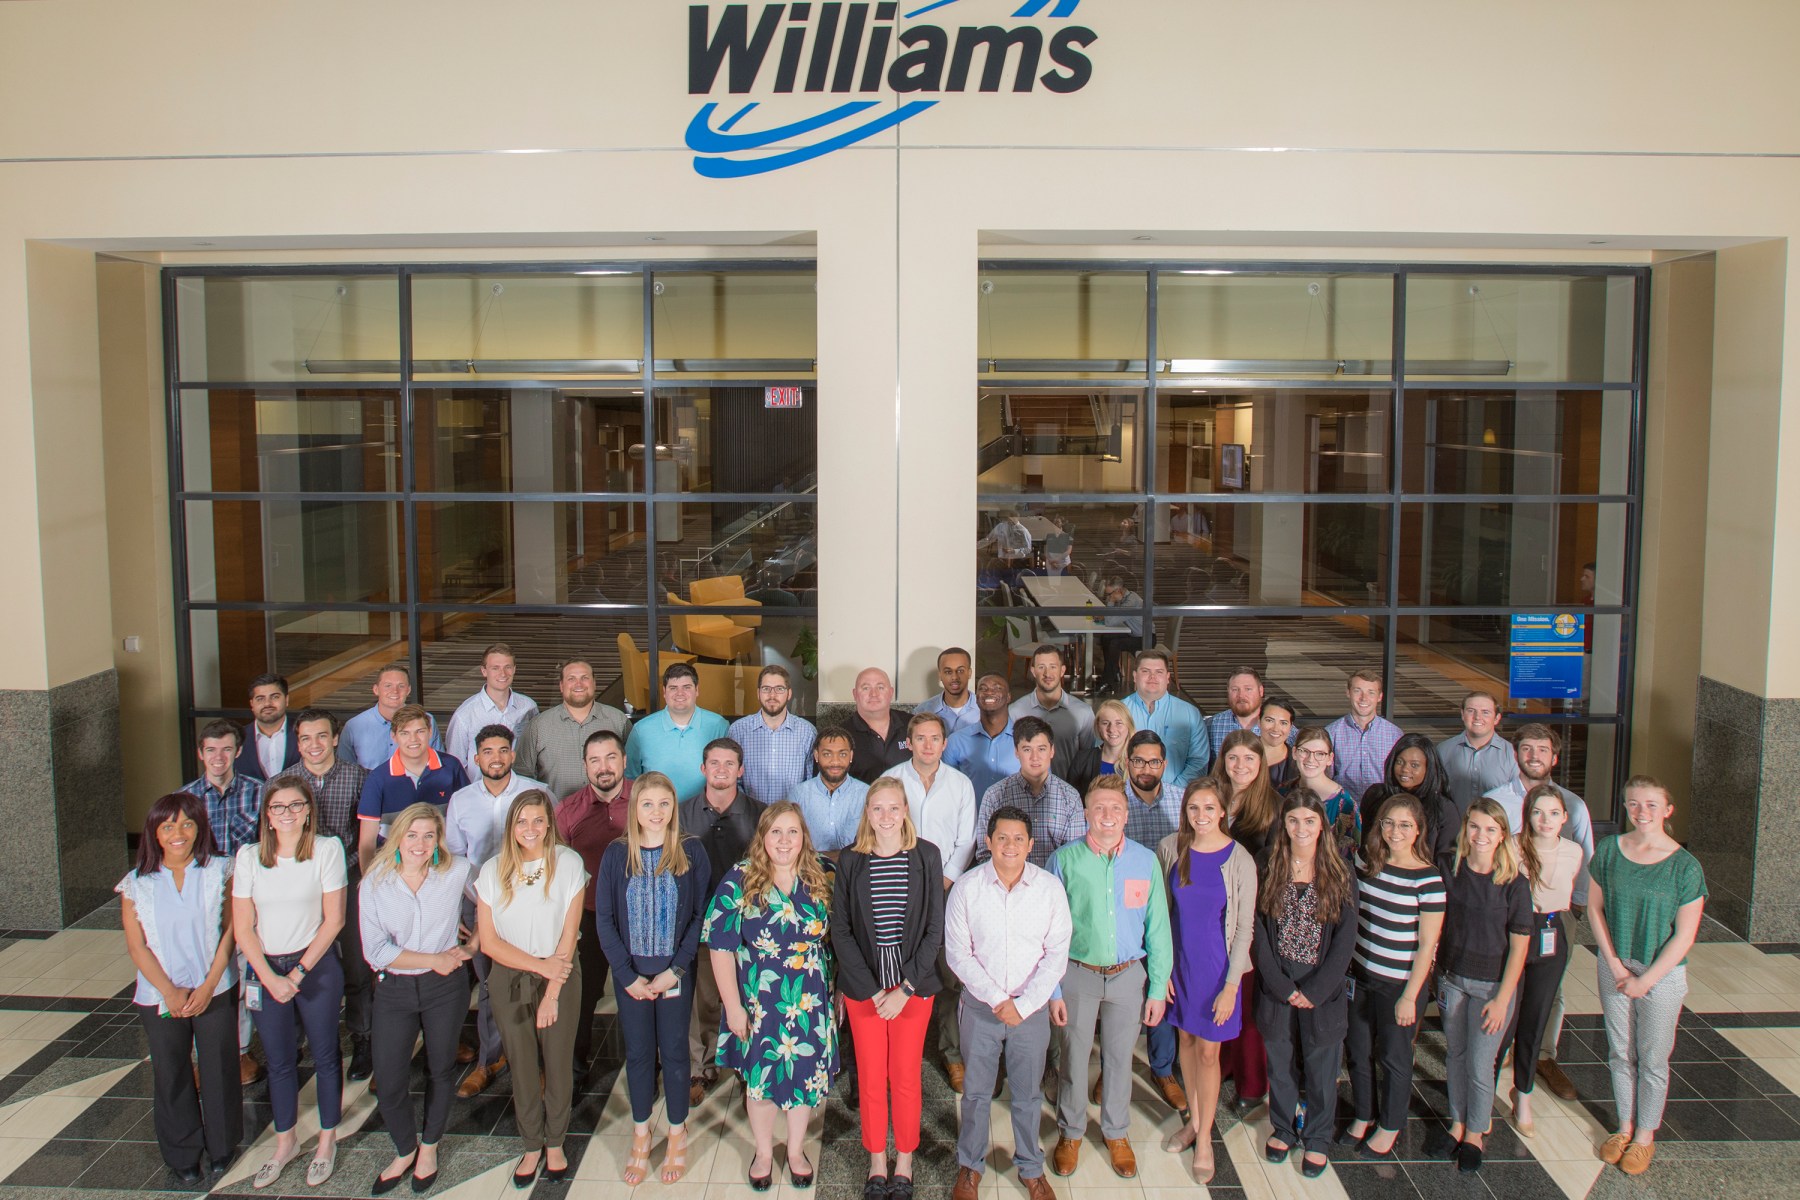 The 2018 Williams intern class pose for a group photo.